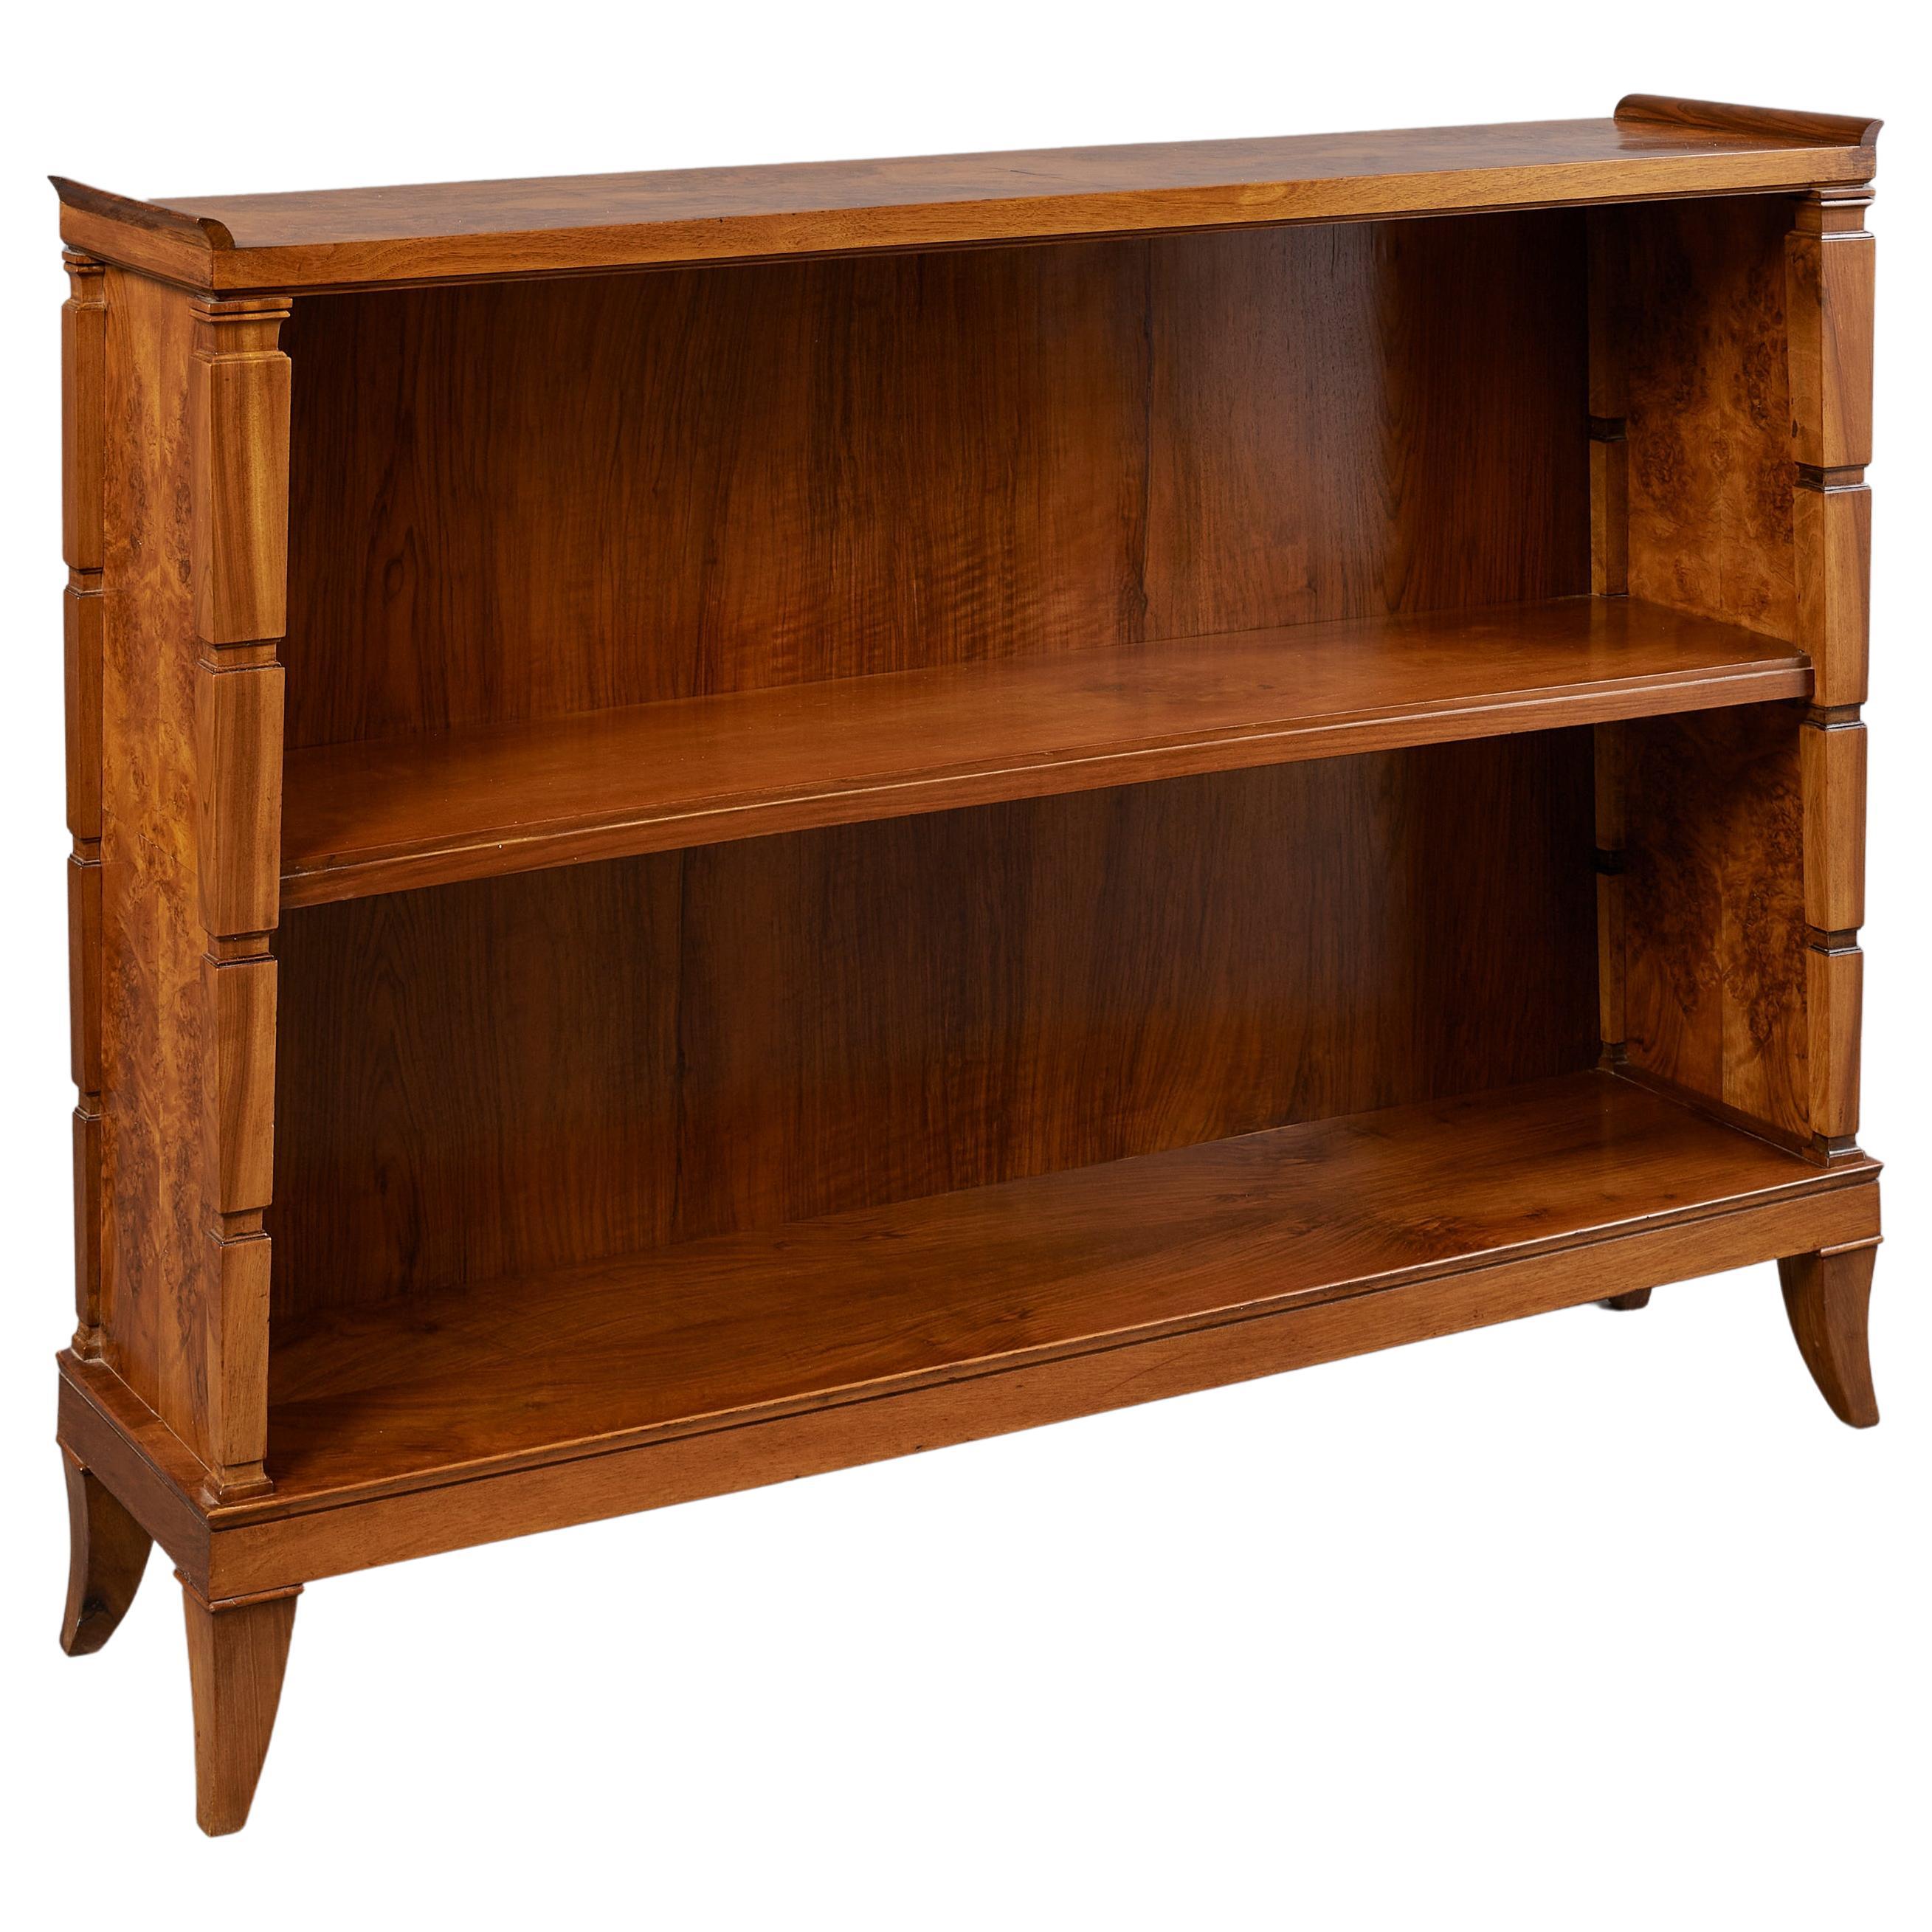 Display Cabinet or Bookcase, School of Gio Ponti and Emilio Lancia, Italy 1940's